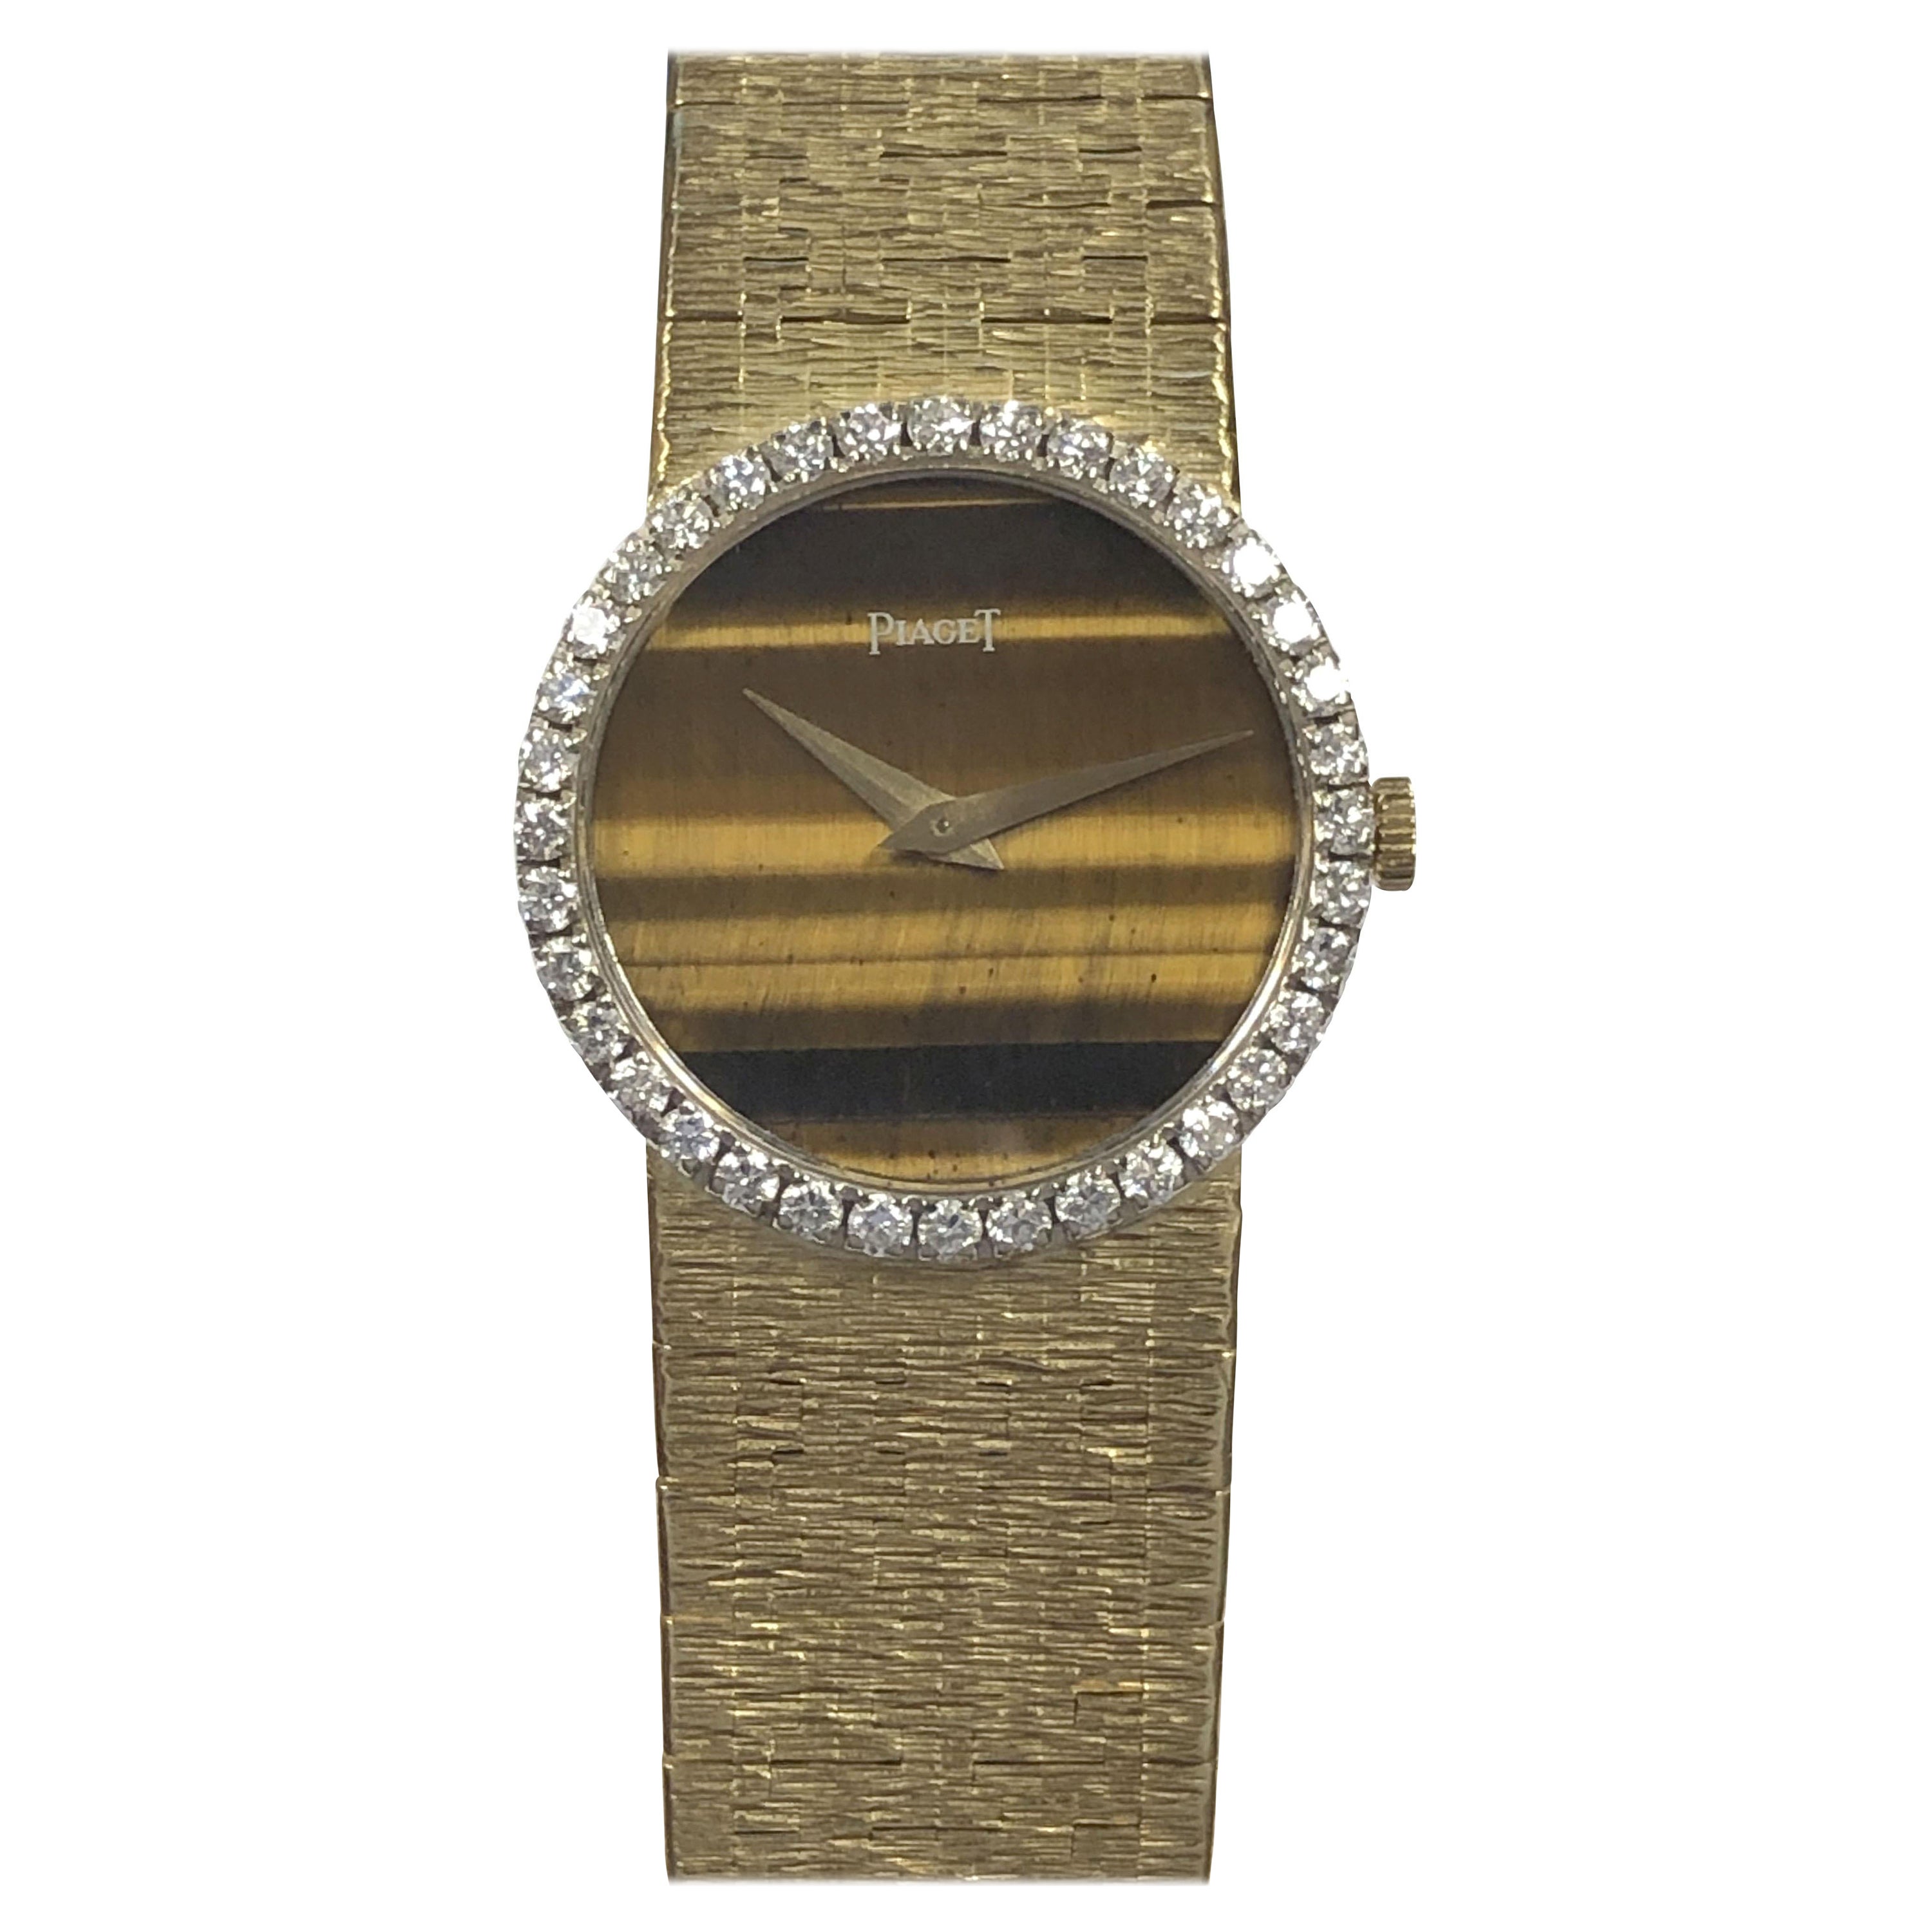 Piaget Yellow Gold Diamond Bezel and Tigers Eye Face Mechanical Wrist Watch For Sale